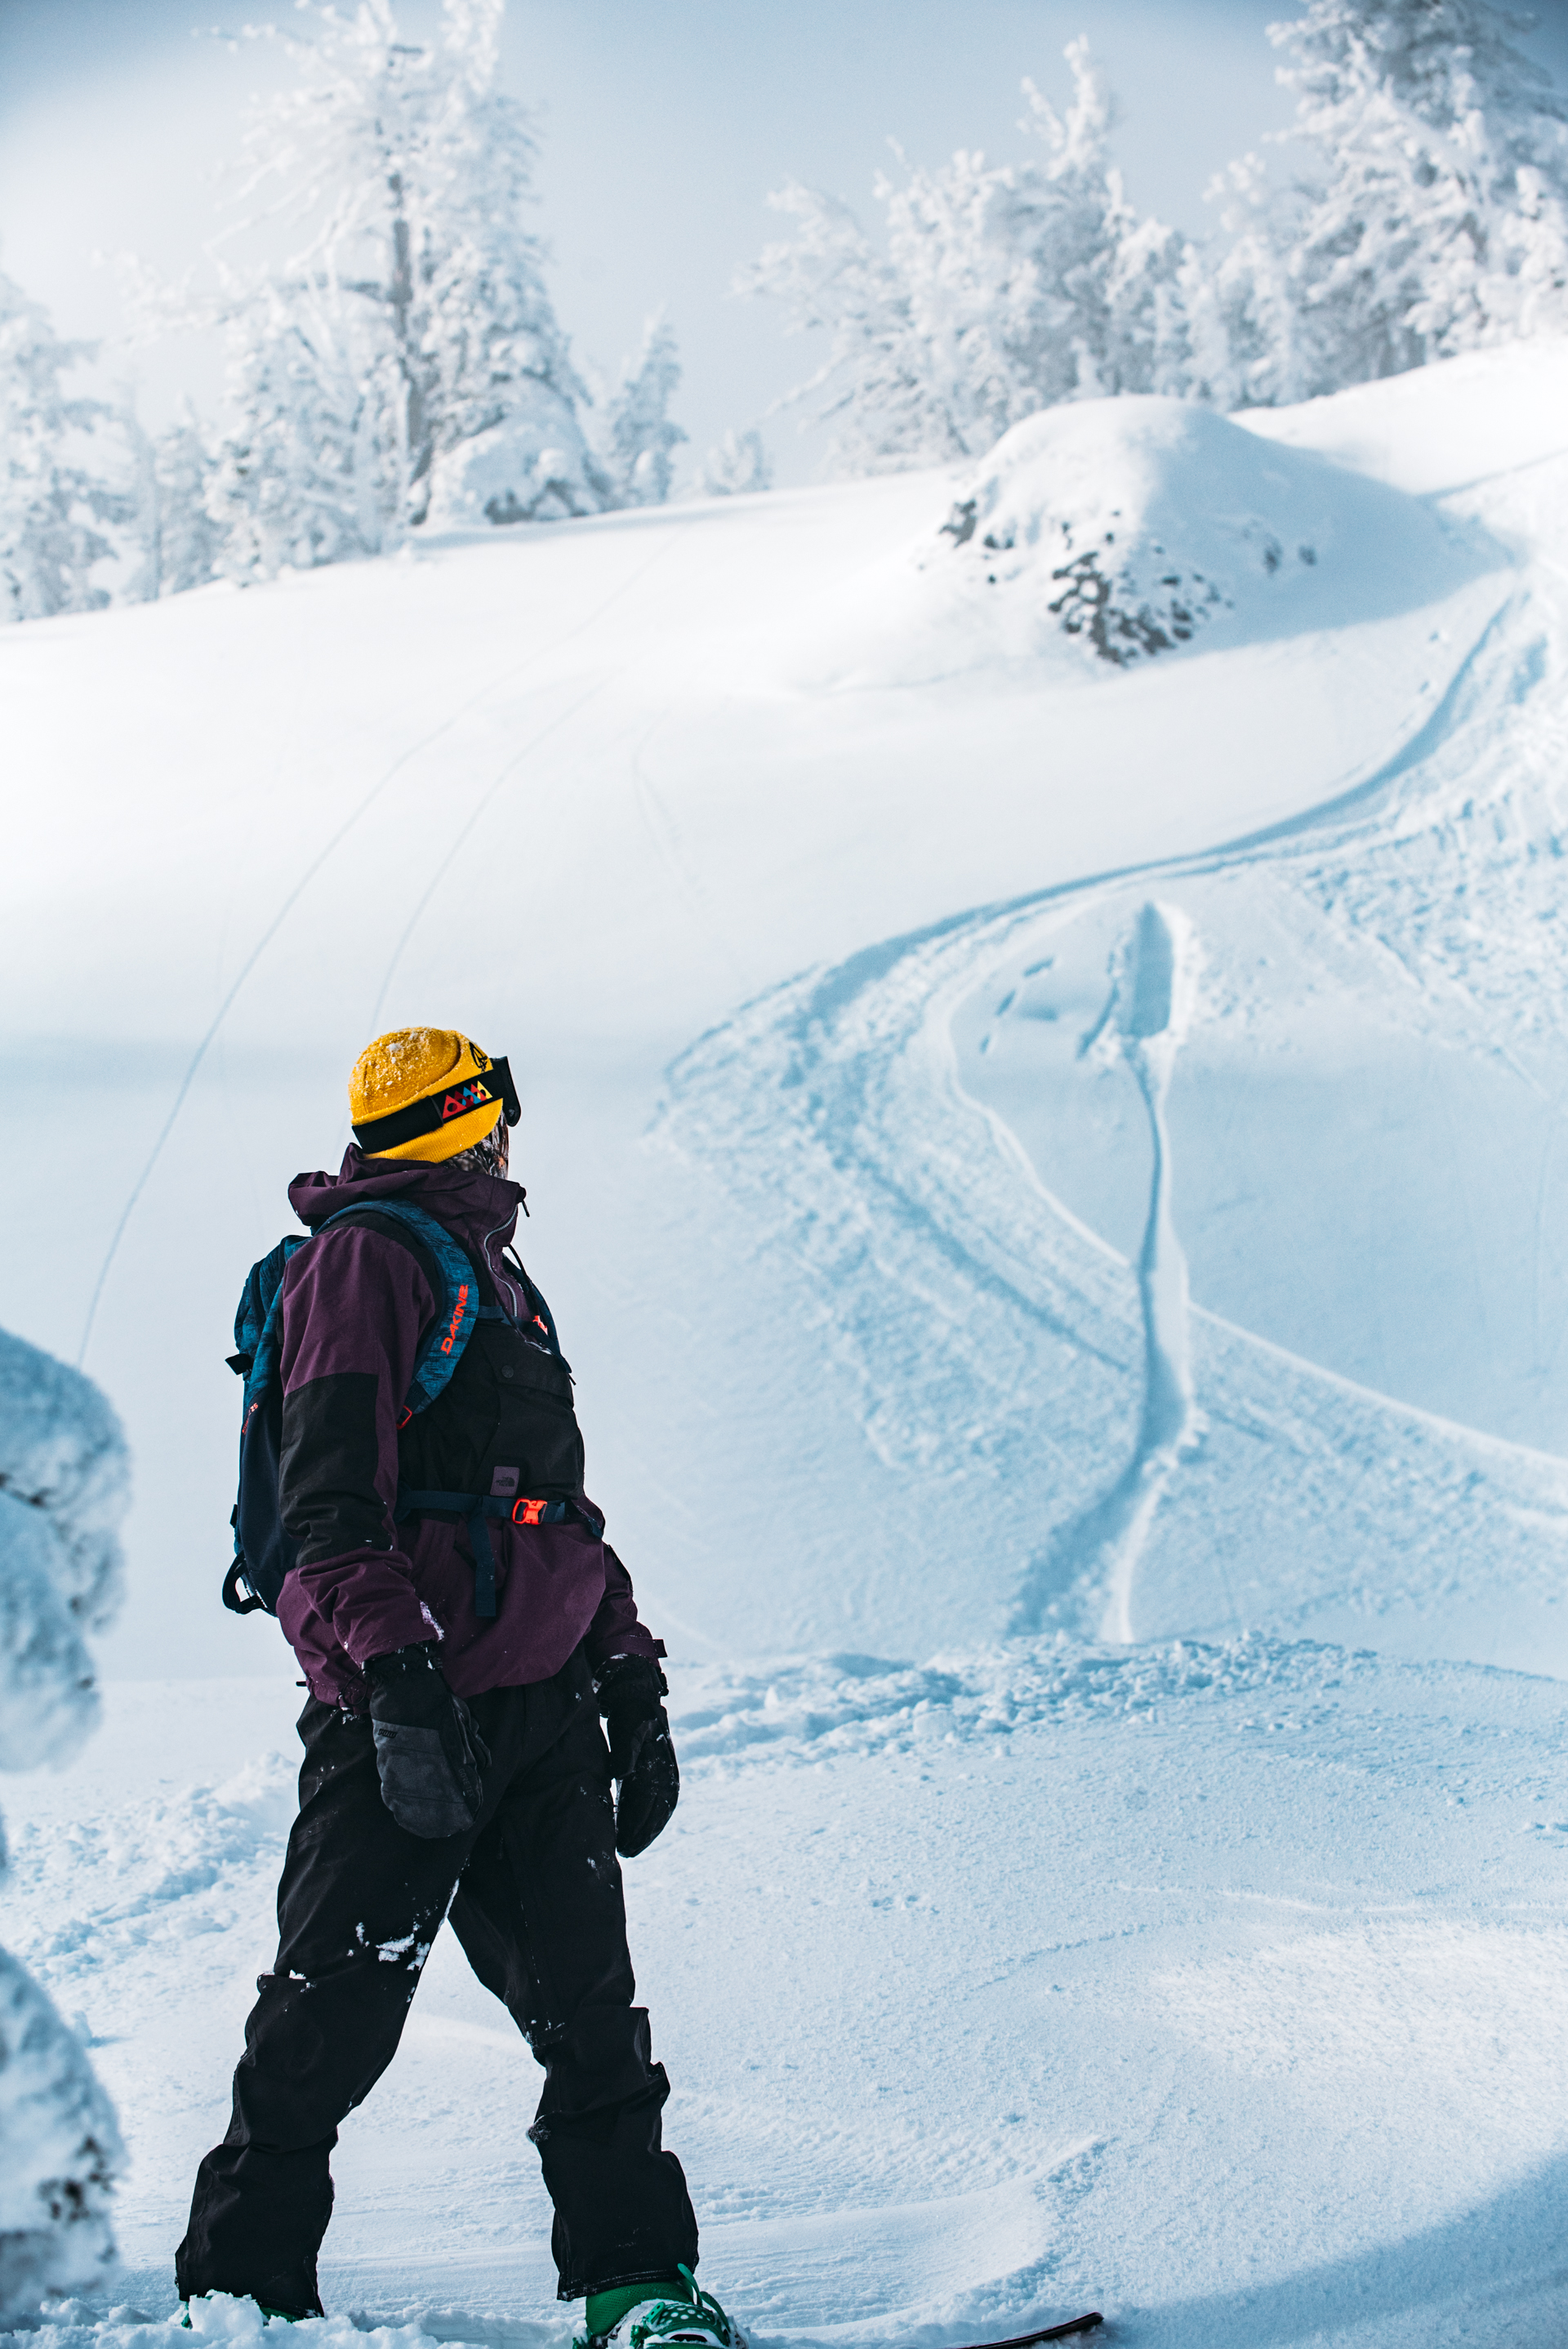 Beyond the Ropes at Mission Ridge - The Snowboarders Journal